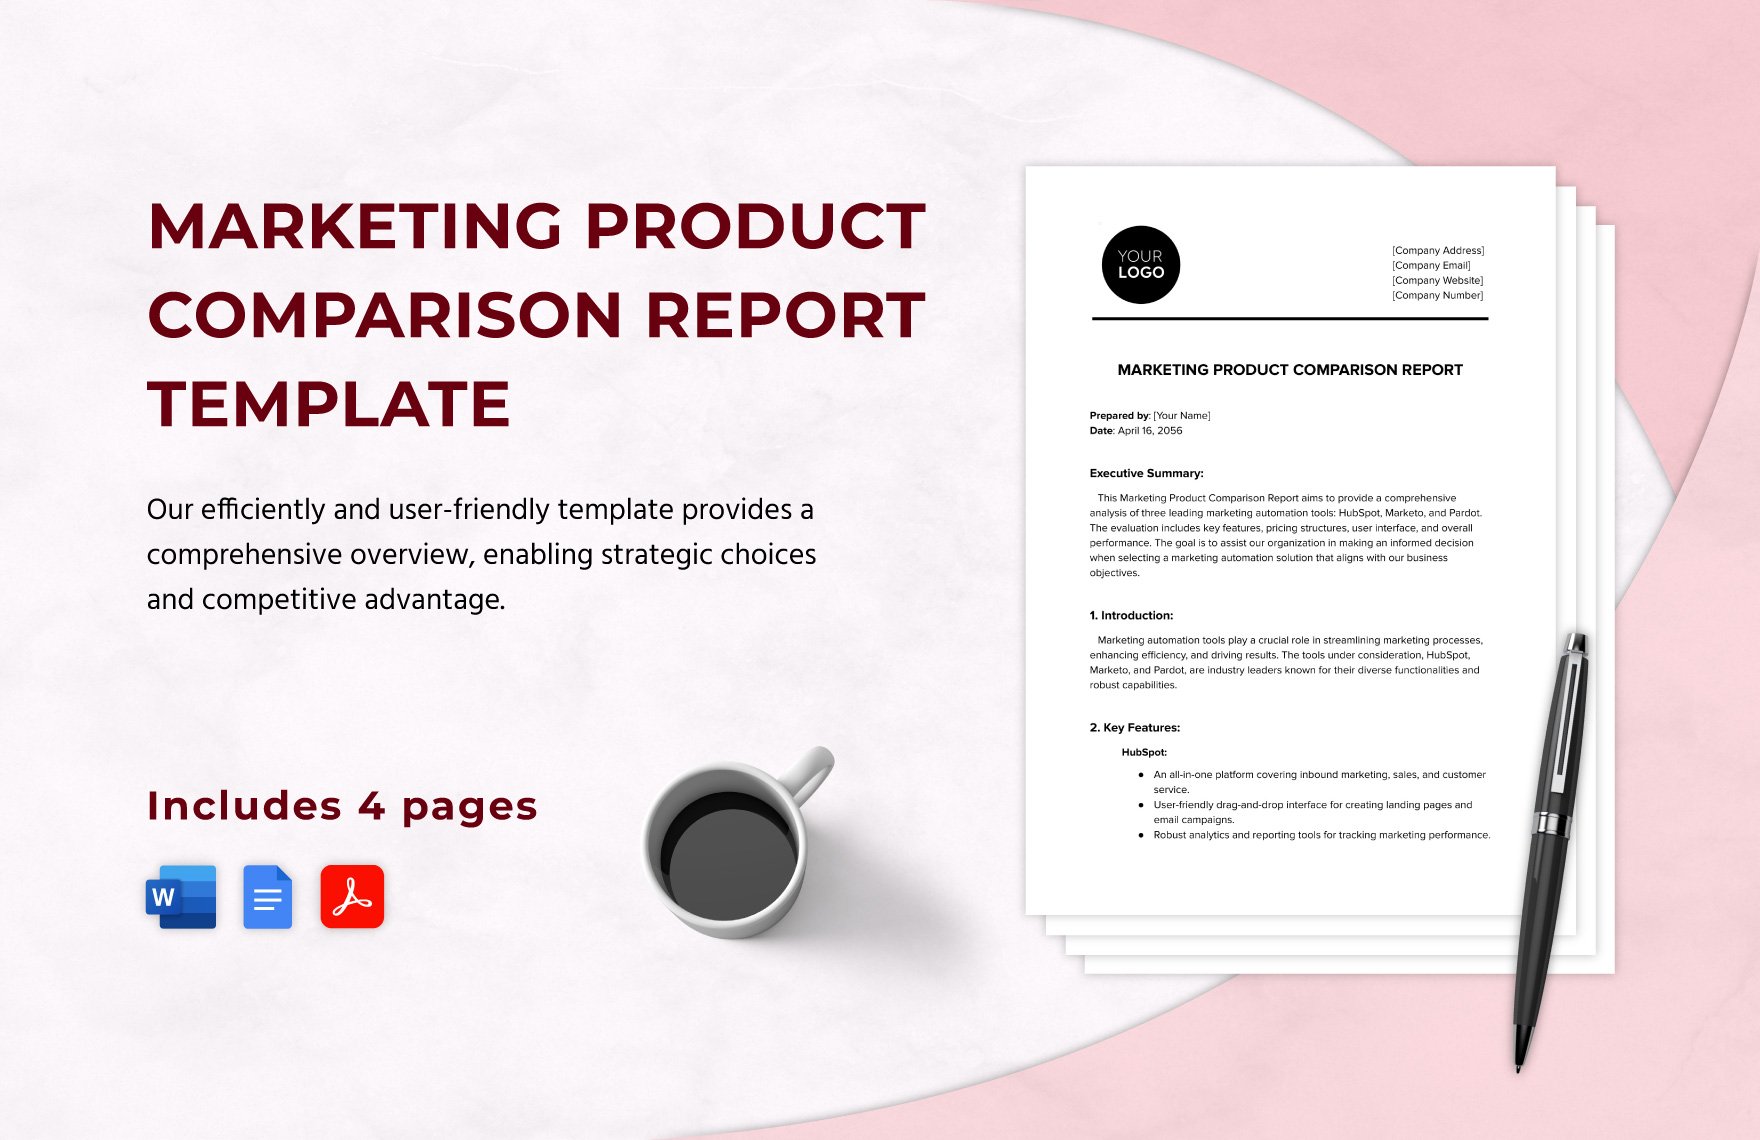 Marketing Product Comparison Report Template in Word, Google Docs, PDF